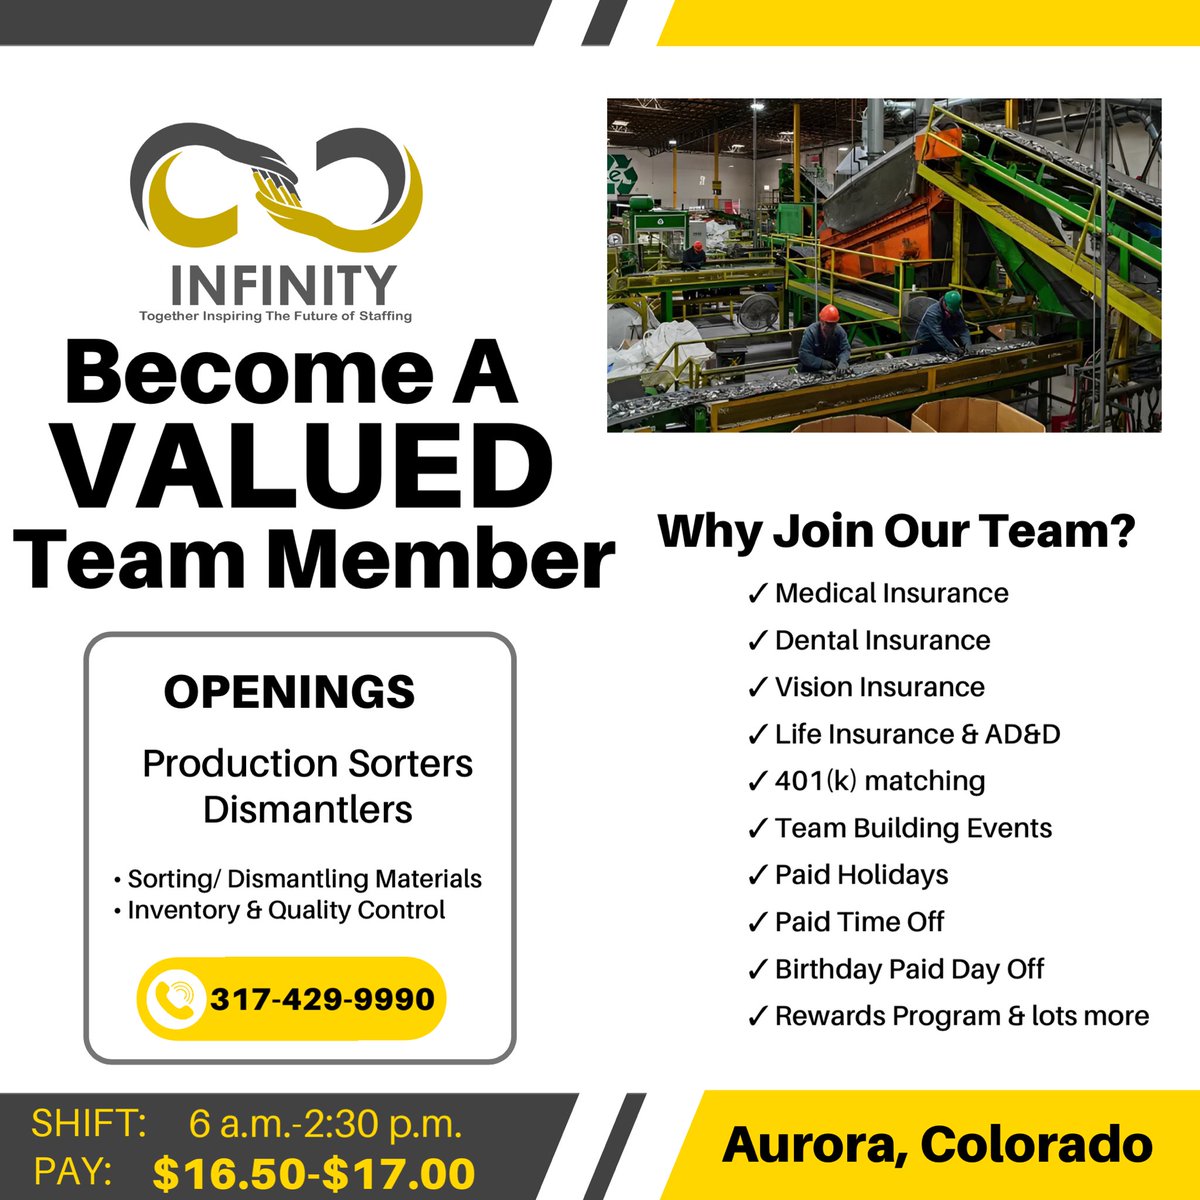 AURORA, COLORADO! New Team members needed, a department has expanded and we have over 20 openings! Contact us IMMEDIATELY & APPLY ONLINE: staffindy.com  (317-429-9990) 

#coloradojobs #hiringcolorado #denvercolorado #auroracolorado #lakewoodcolorado #glendale #staffing